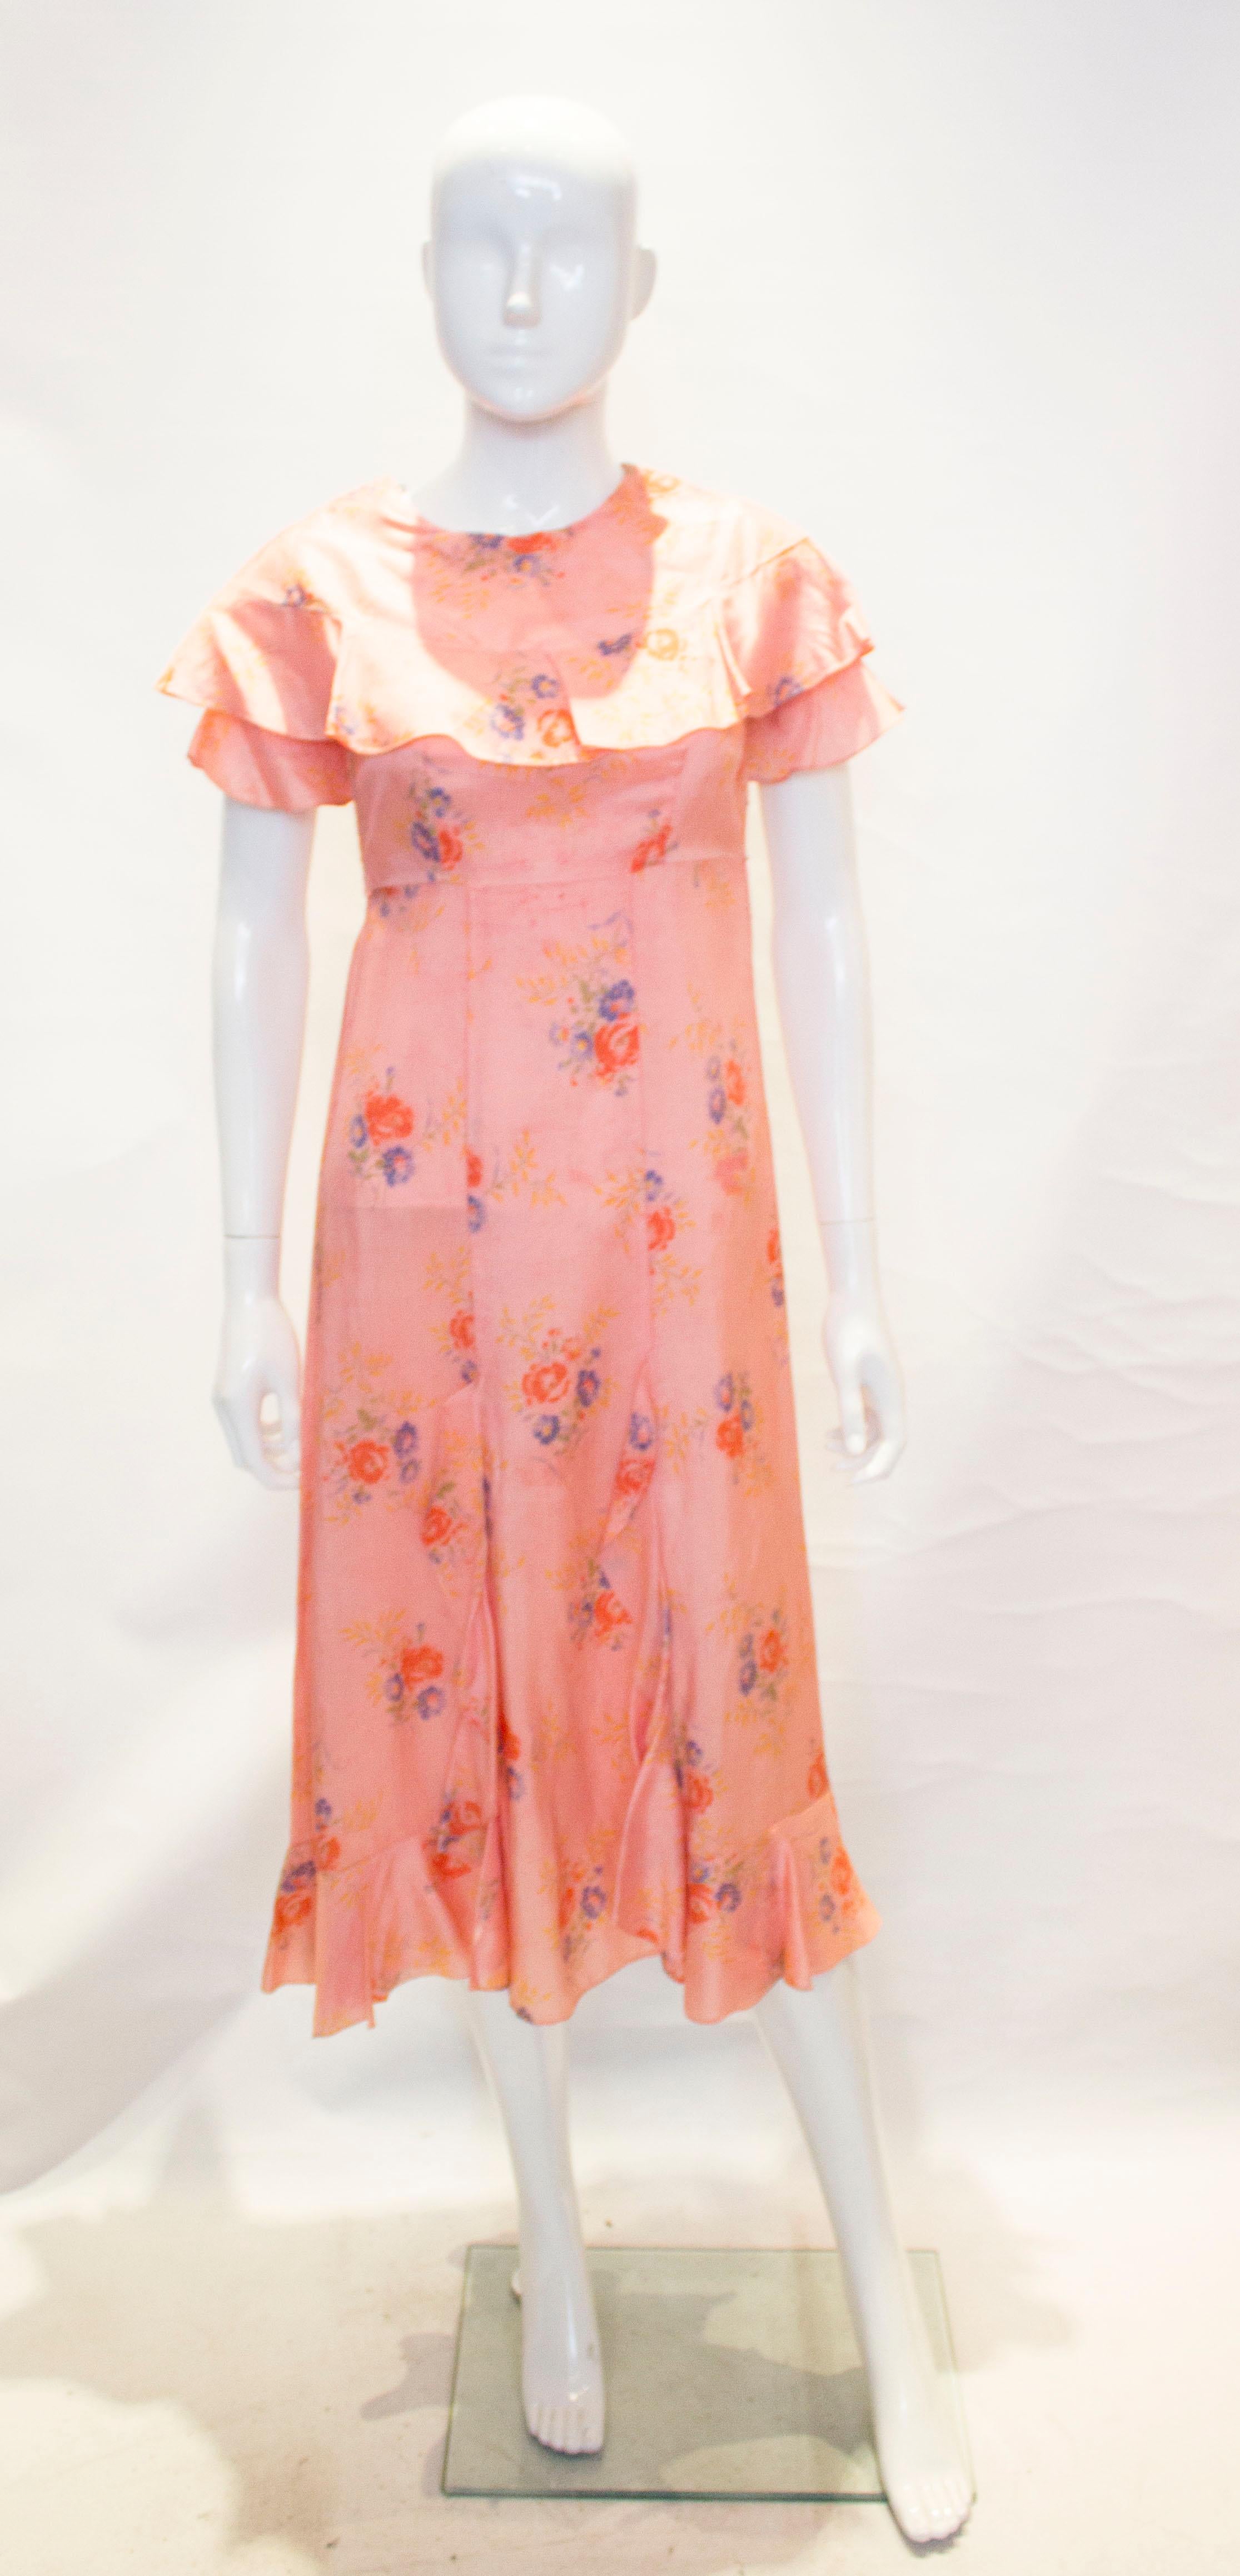 A pretty vintage pink floral dress. It has a popper opening at the shoulder and side..It has ruffle detail on the neckline and lower front and hem.